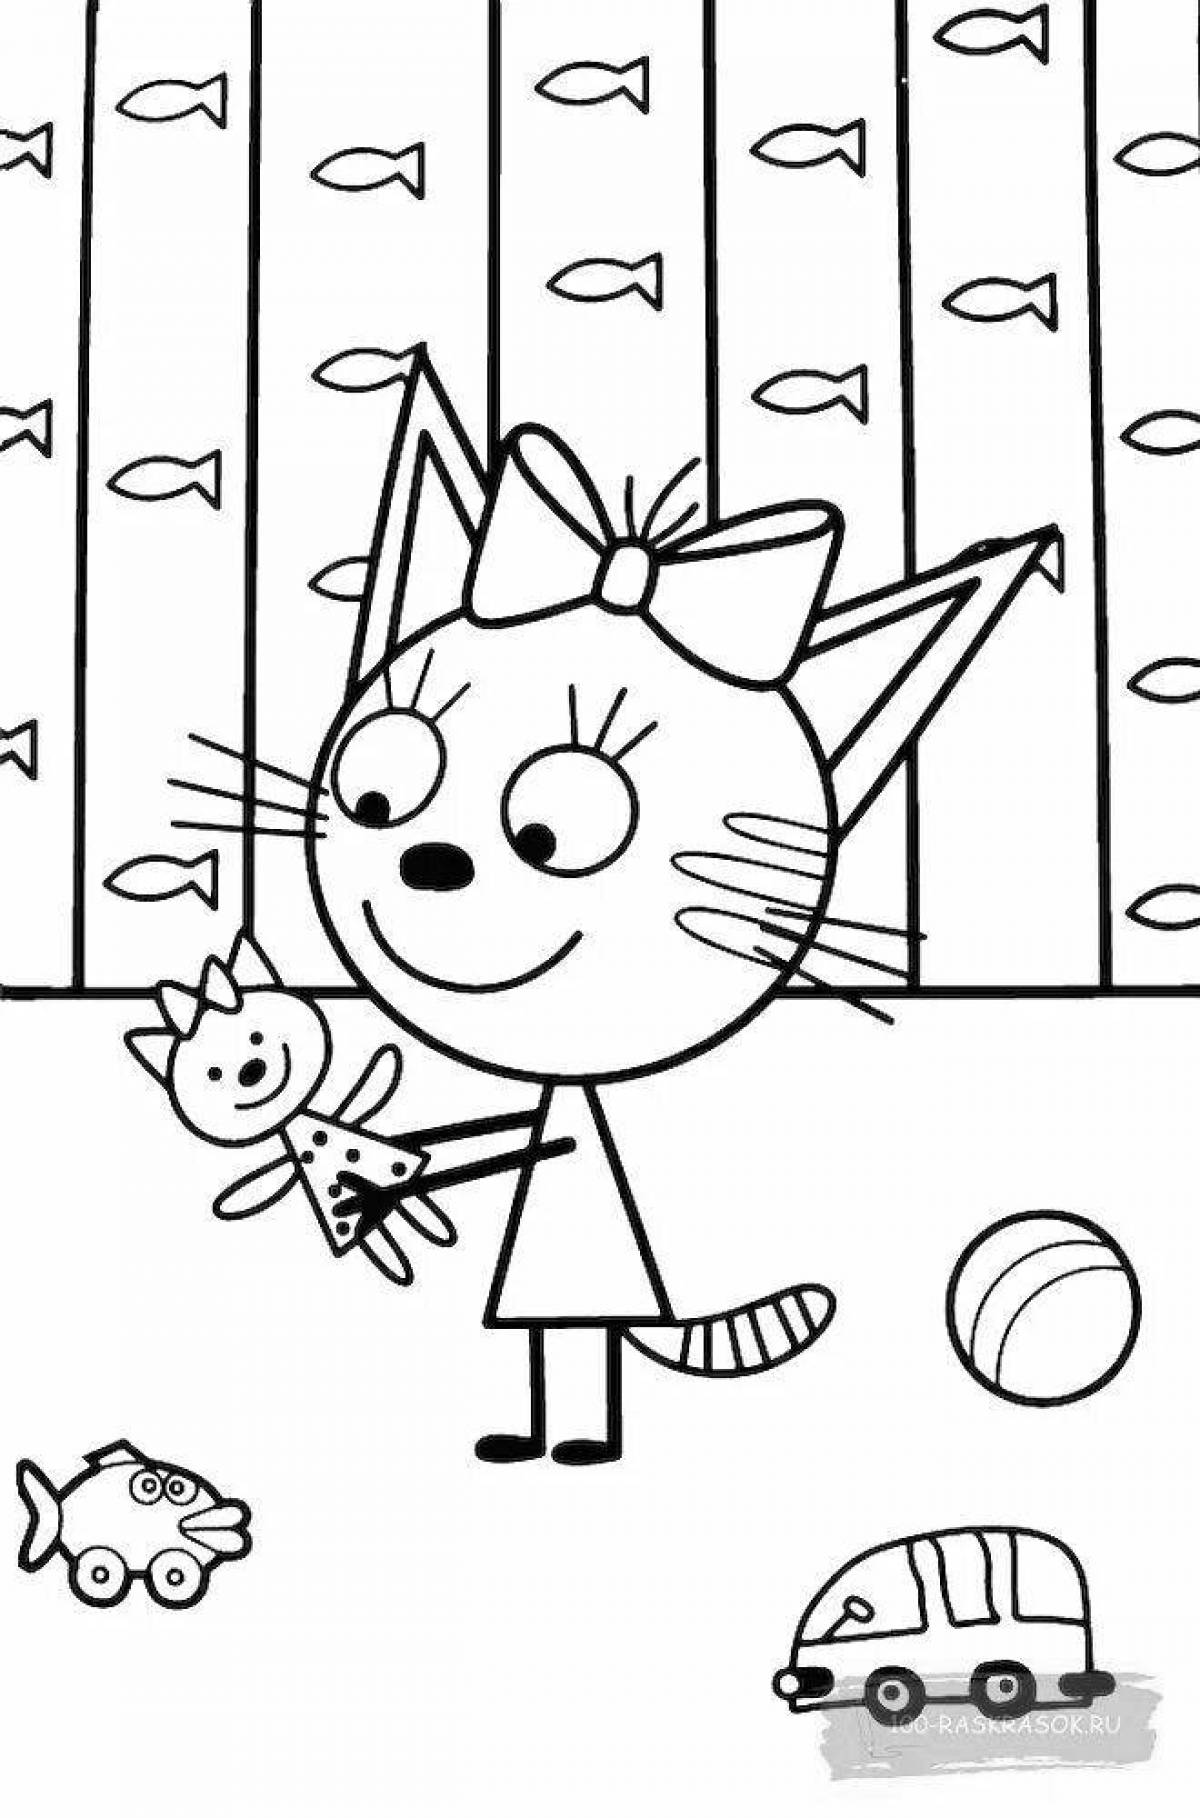 Coloring pages 3 cats for kids